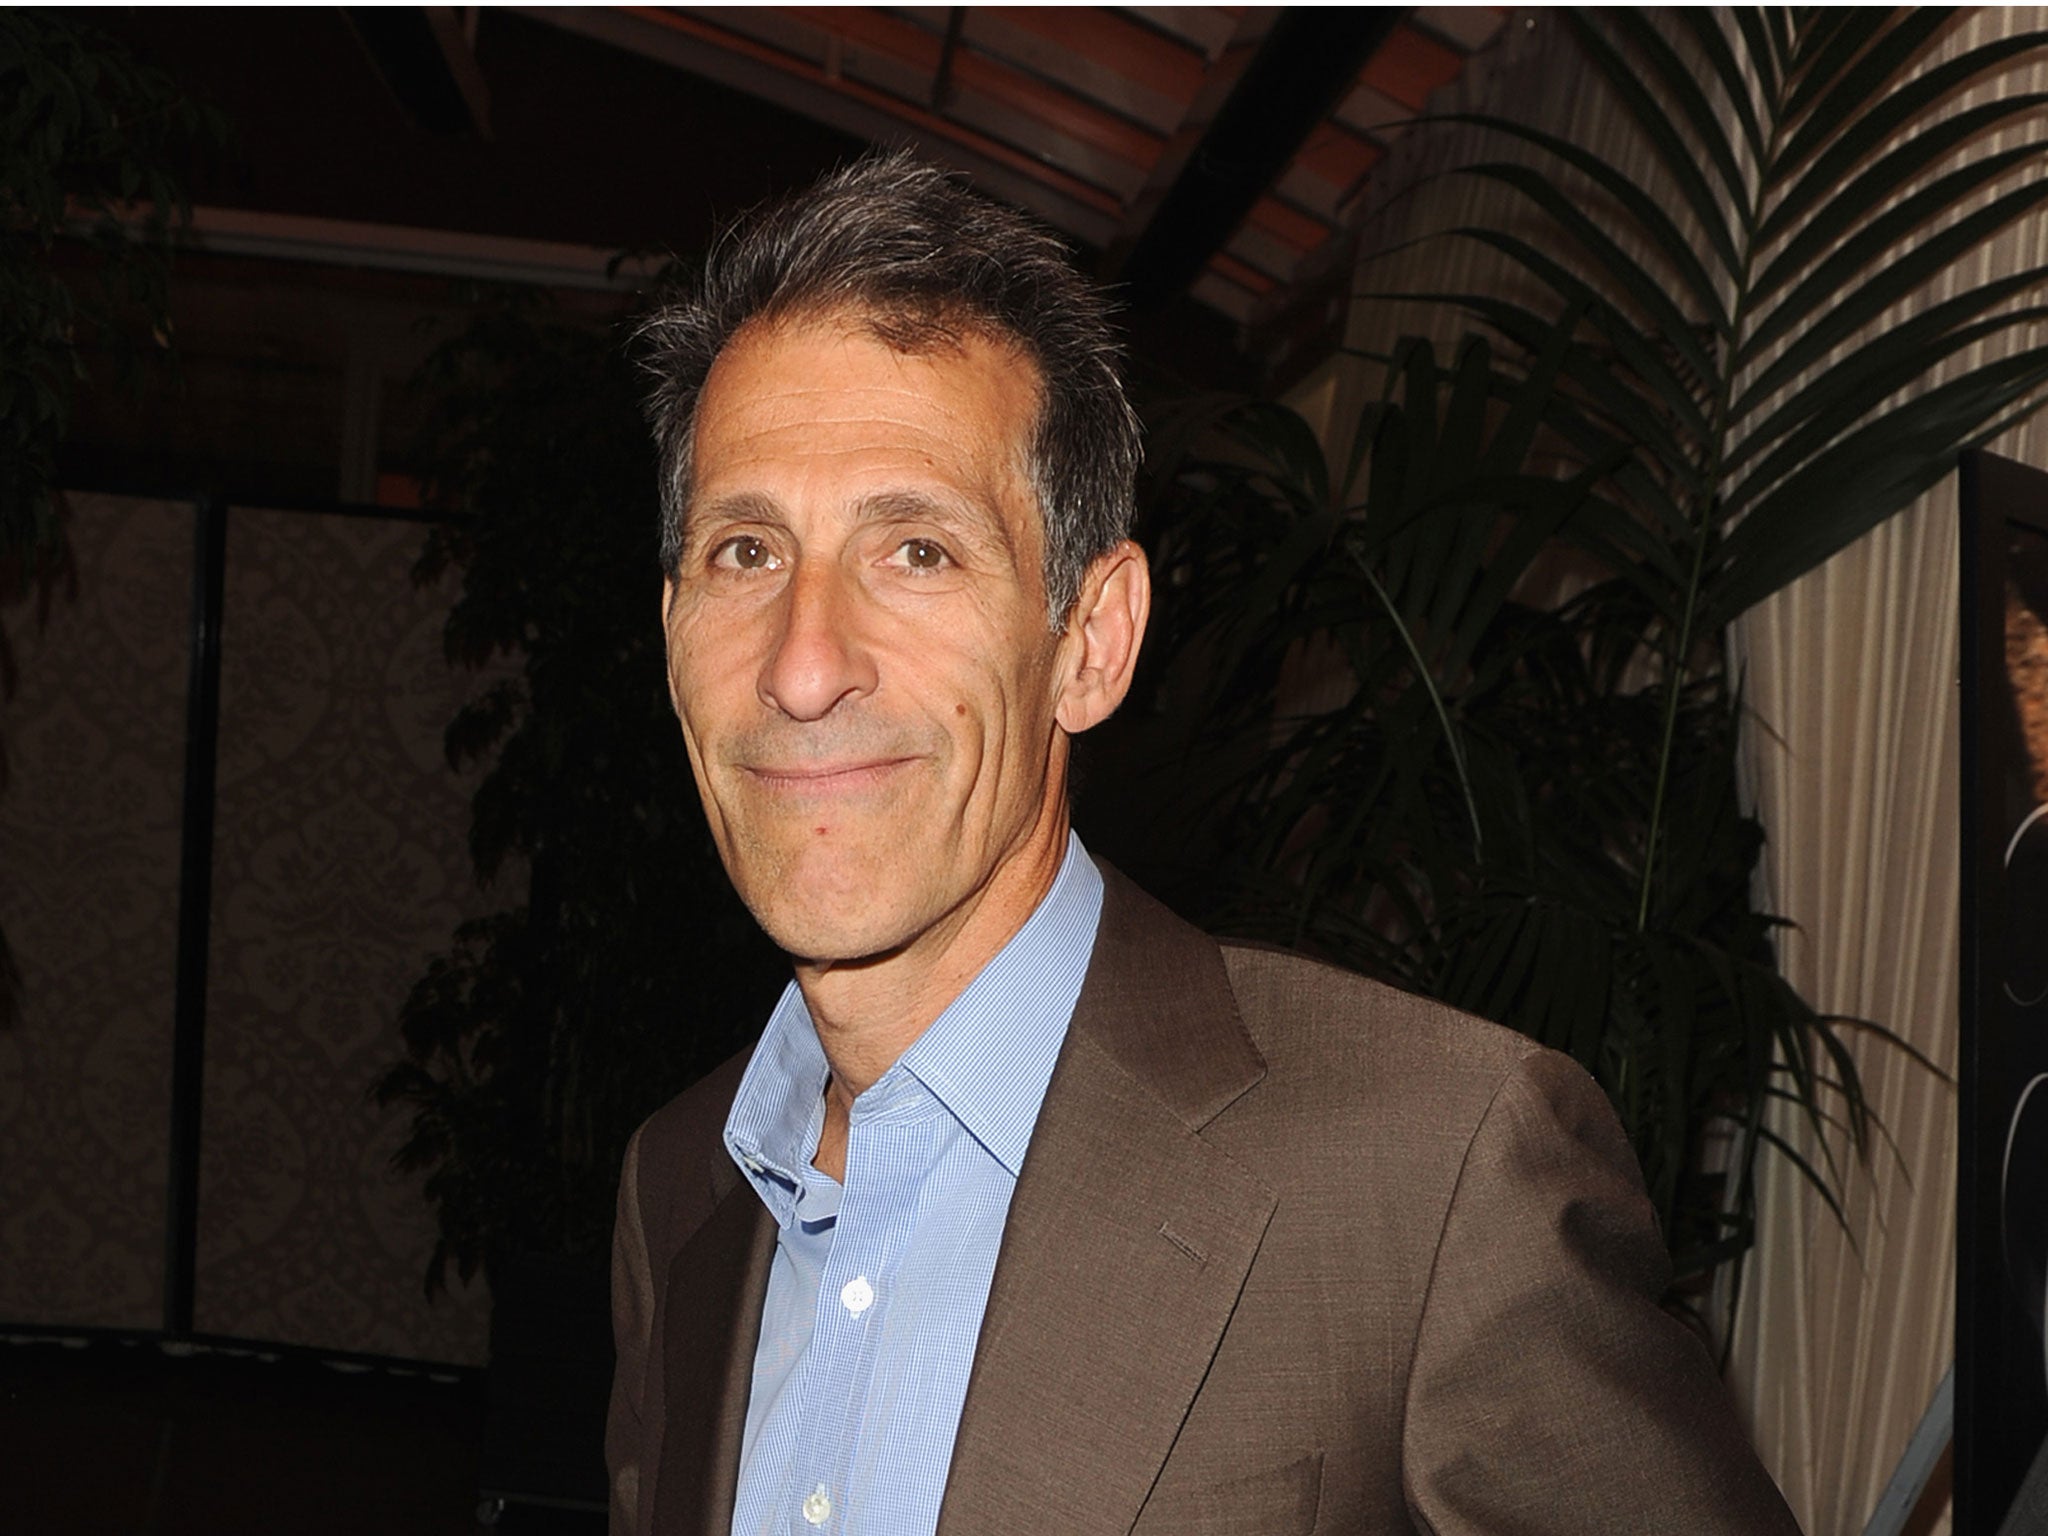 Sony Pictures CEO Michael Lynton